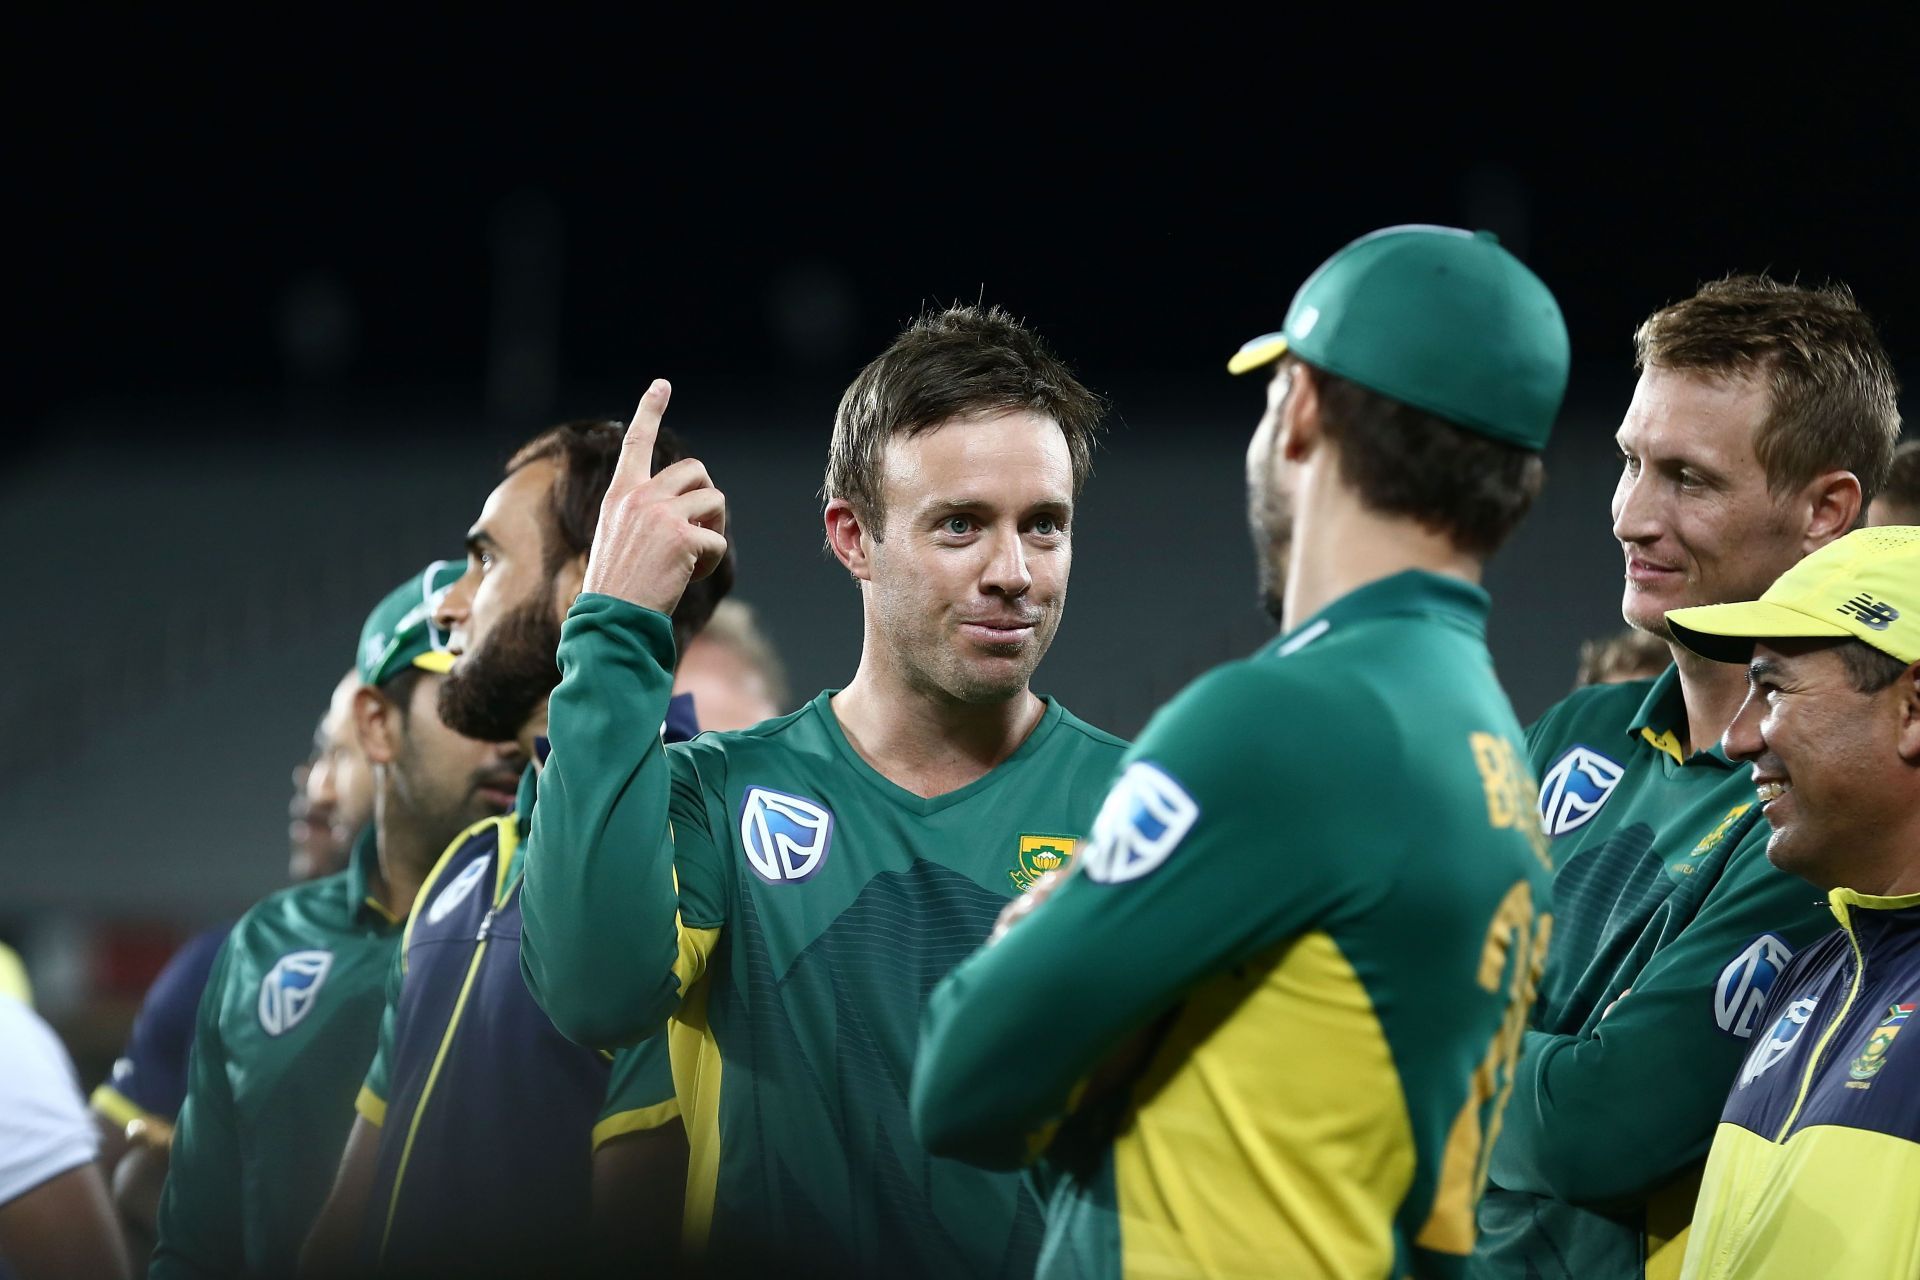 AB De Villiers celebrates a catch while on national duty